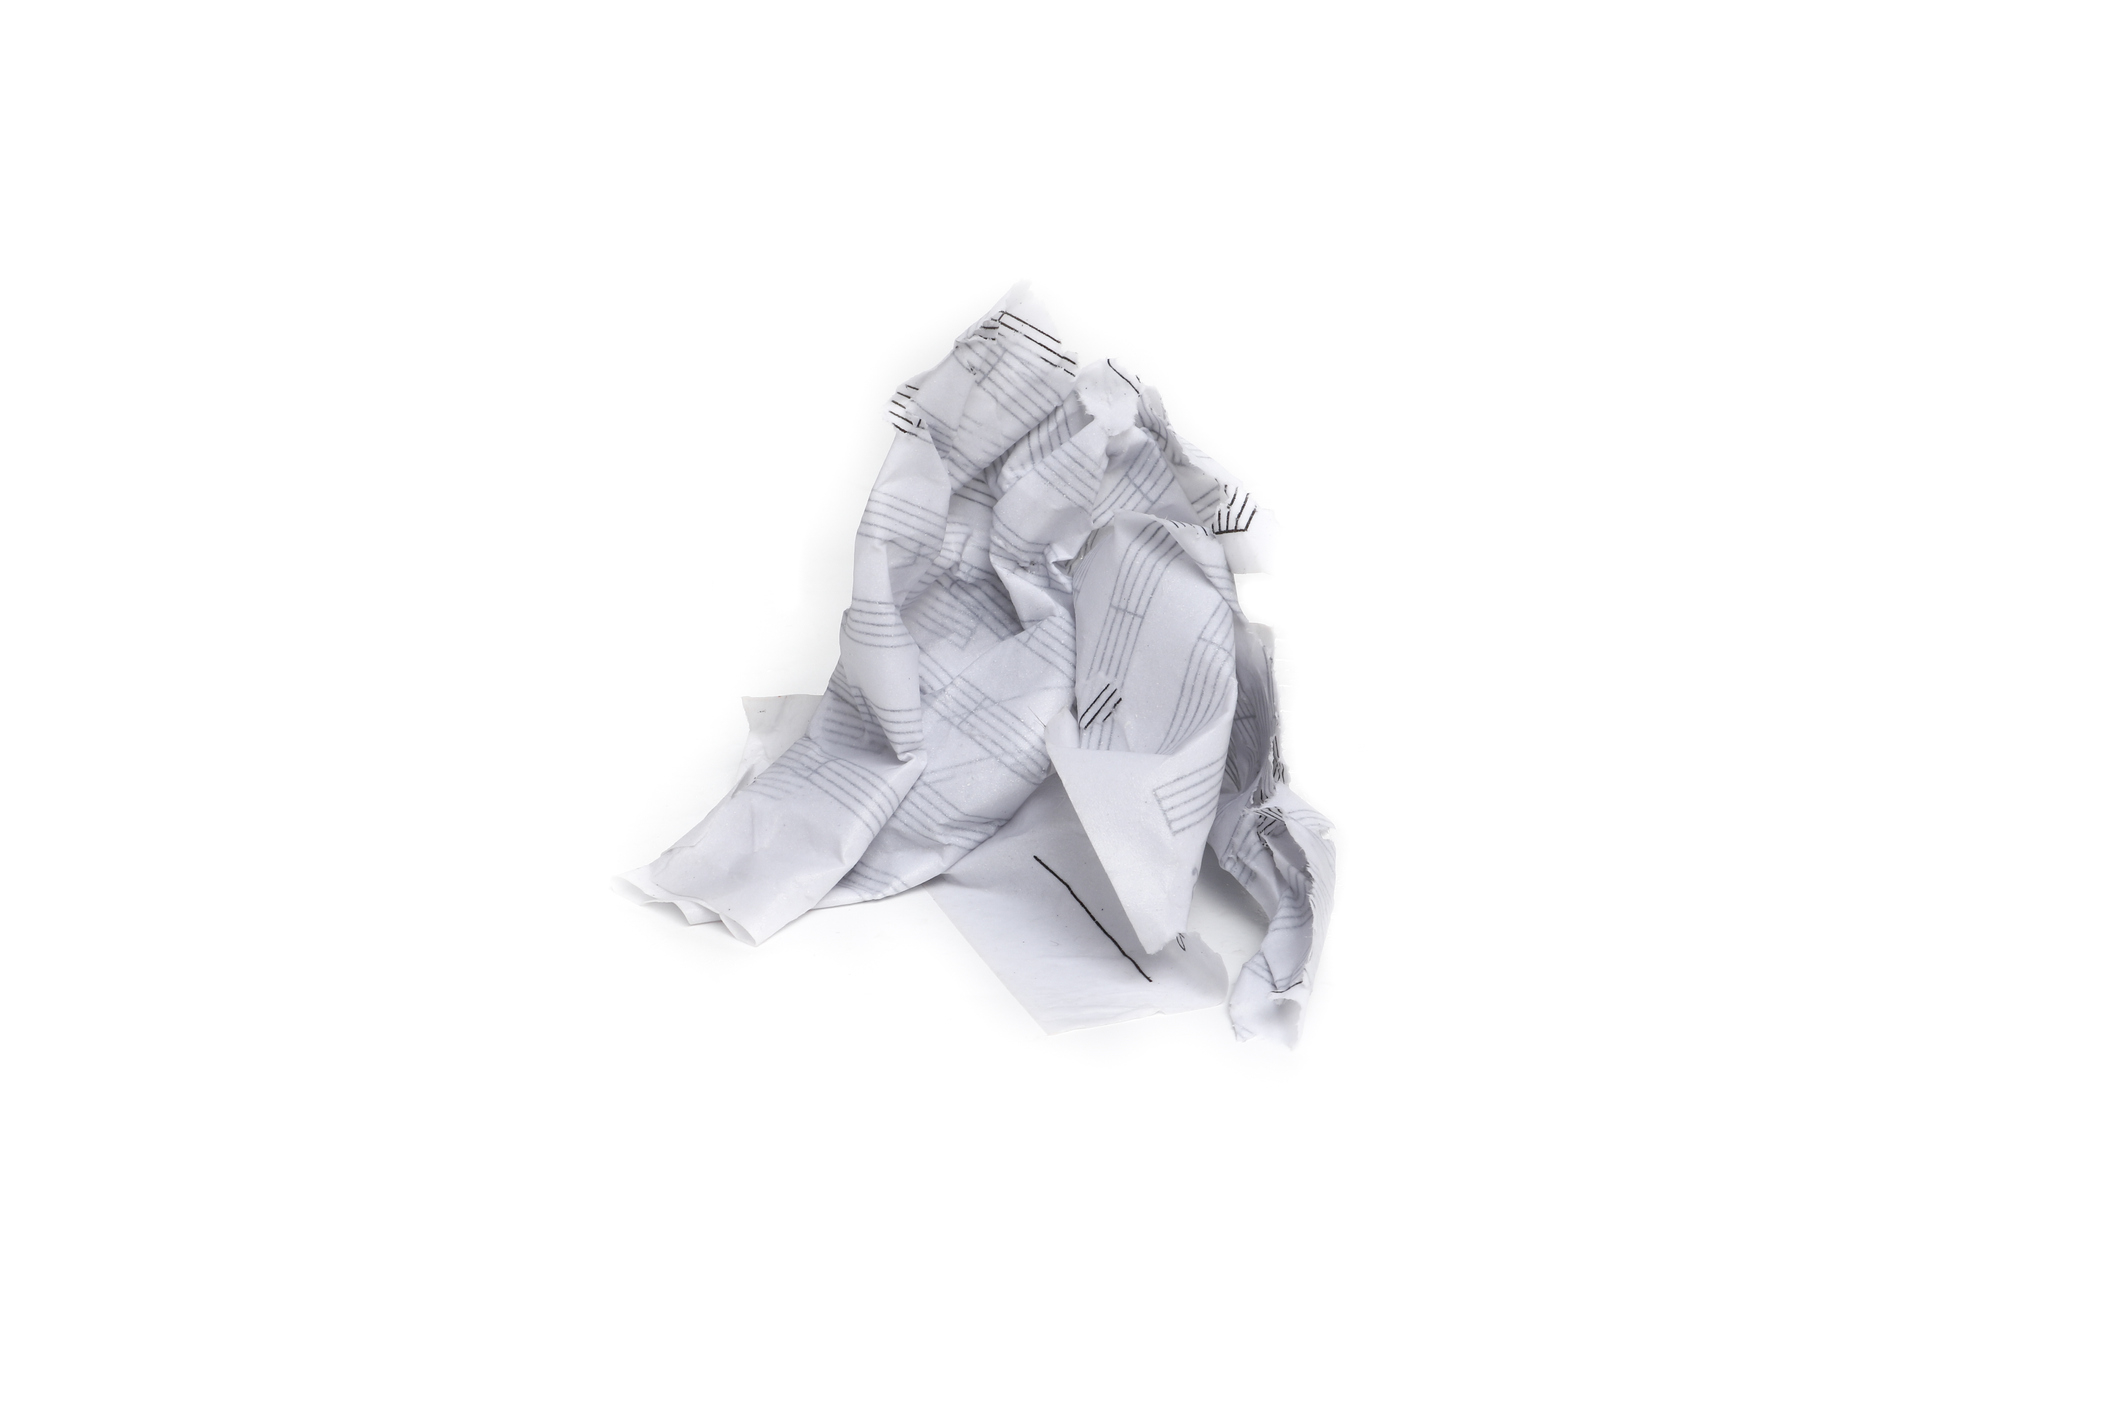 A crumpled piece of paper